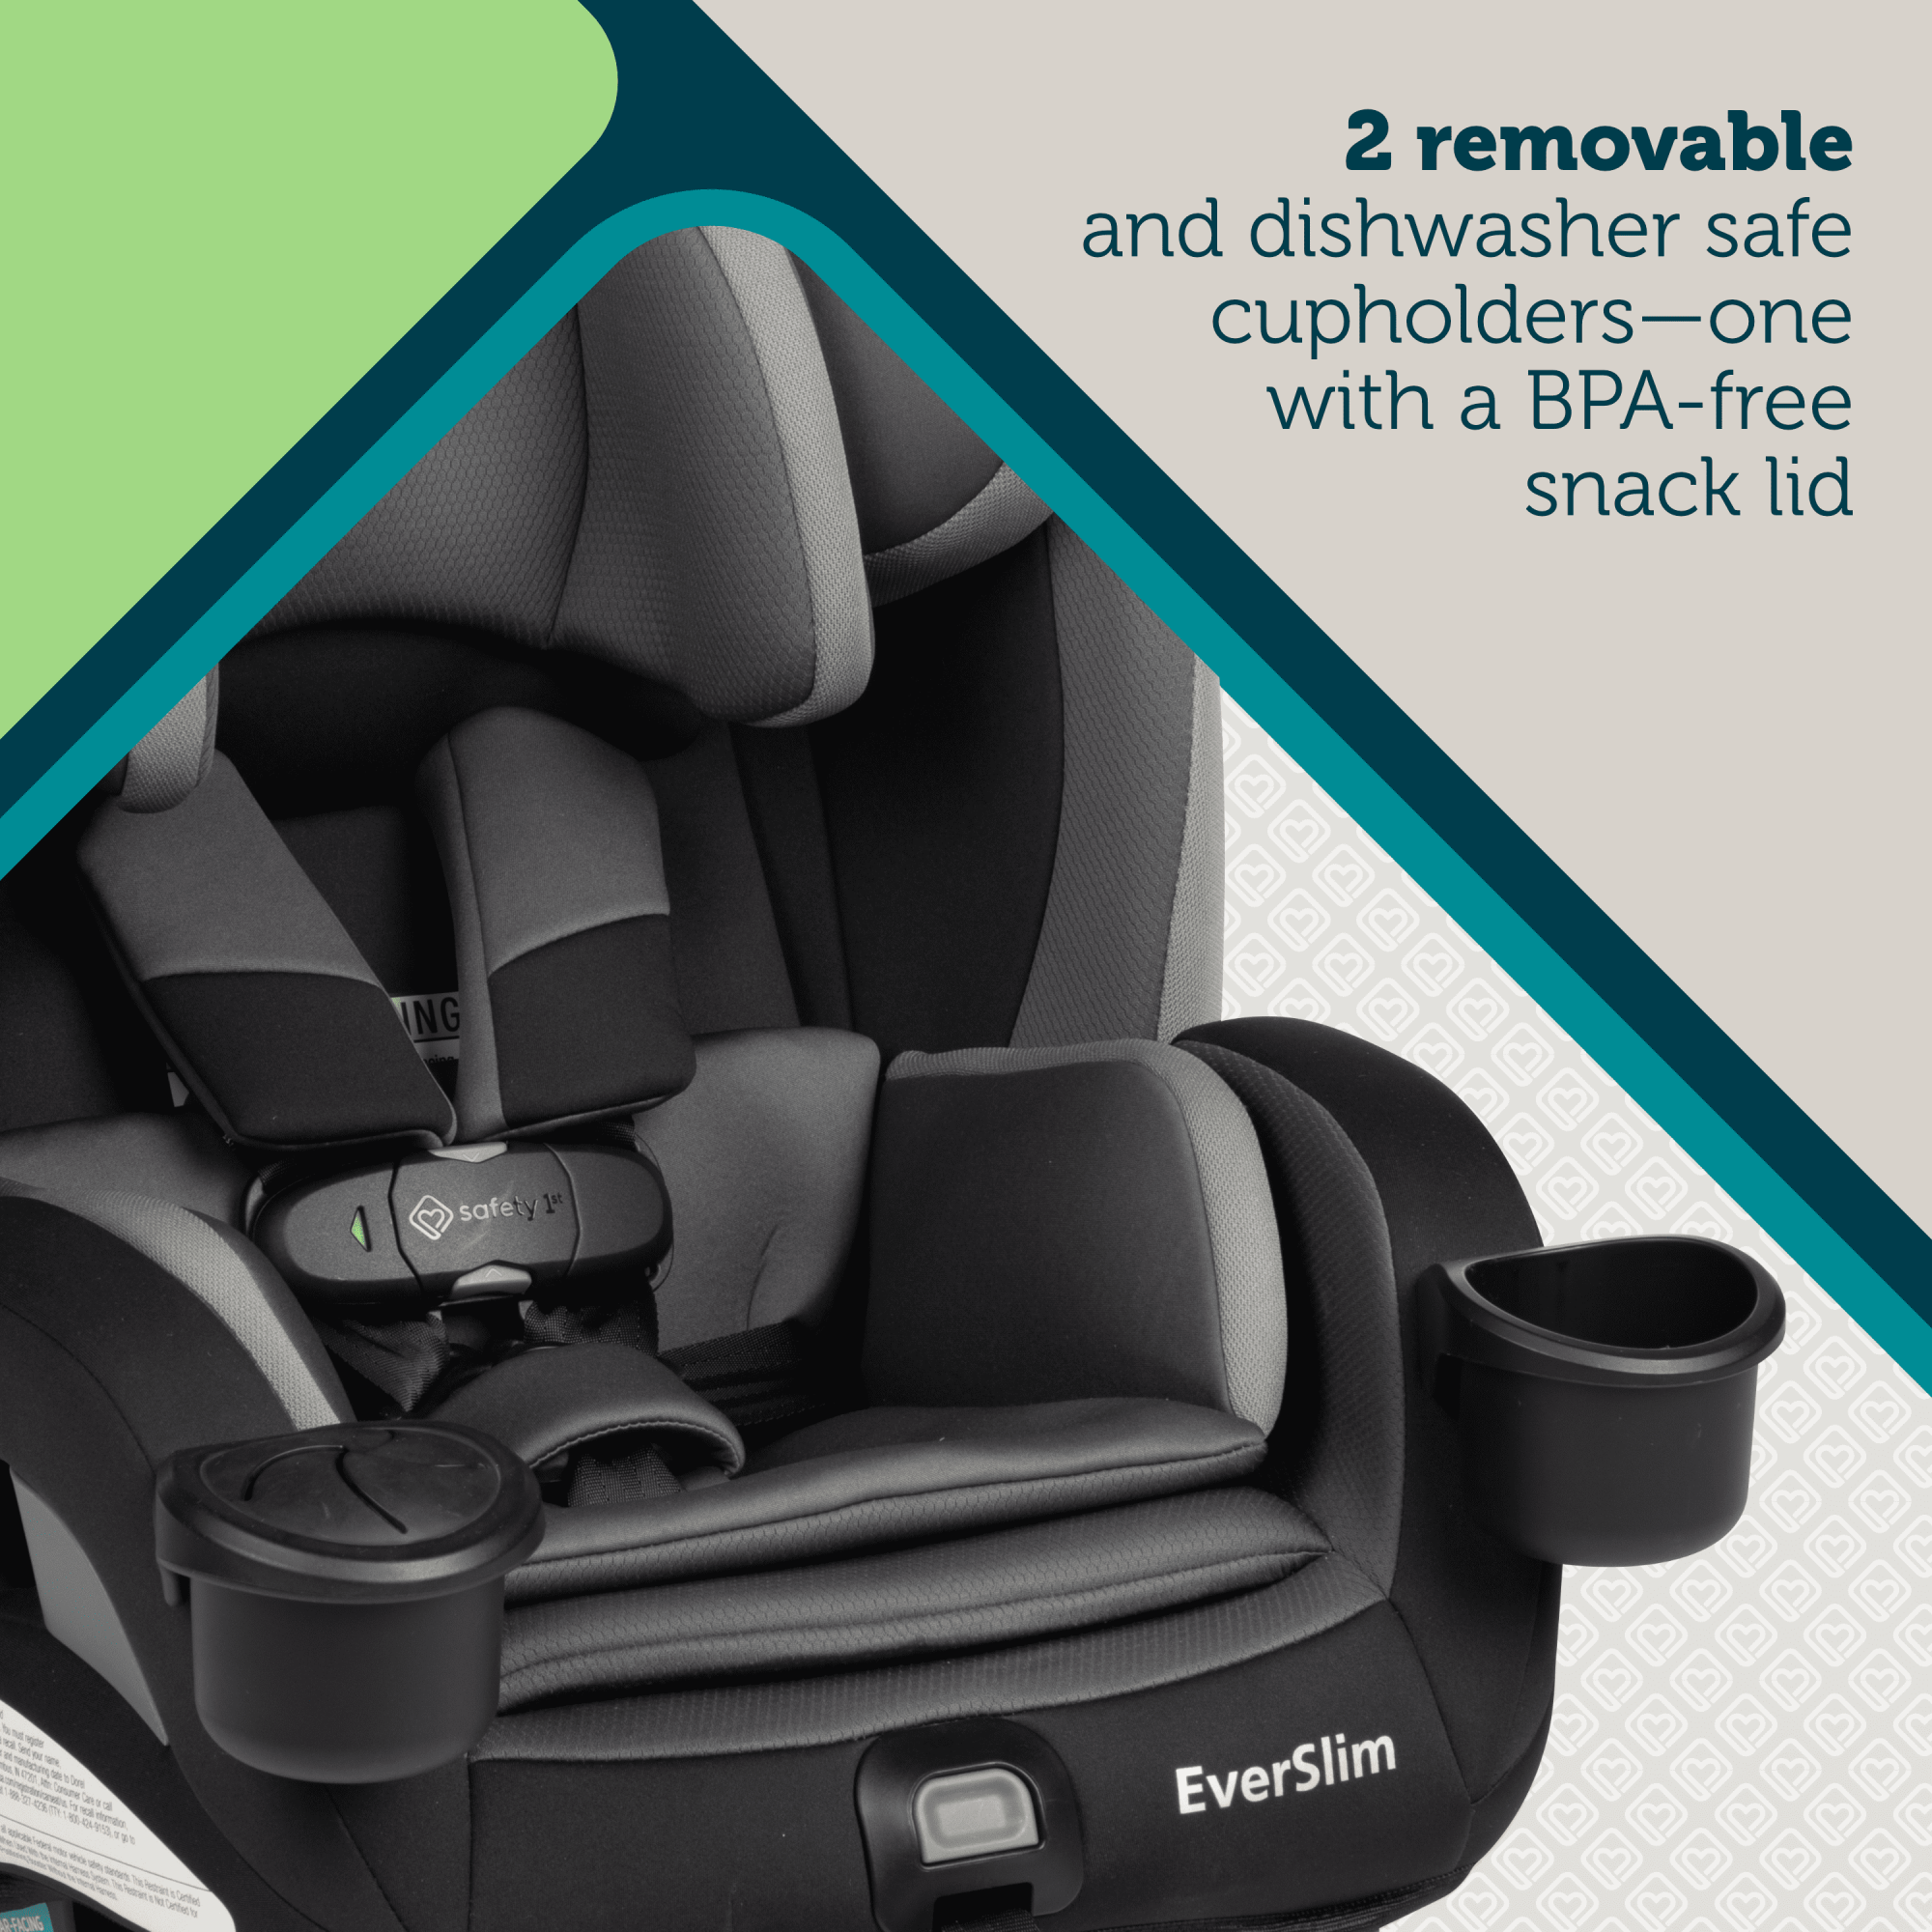 EverSlim 4-Mode All-in-One Convertible Car Seat - 2 removable and dishwasher safe cupholders - one with a BPA-free snack lid